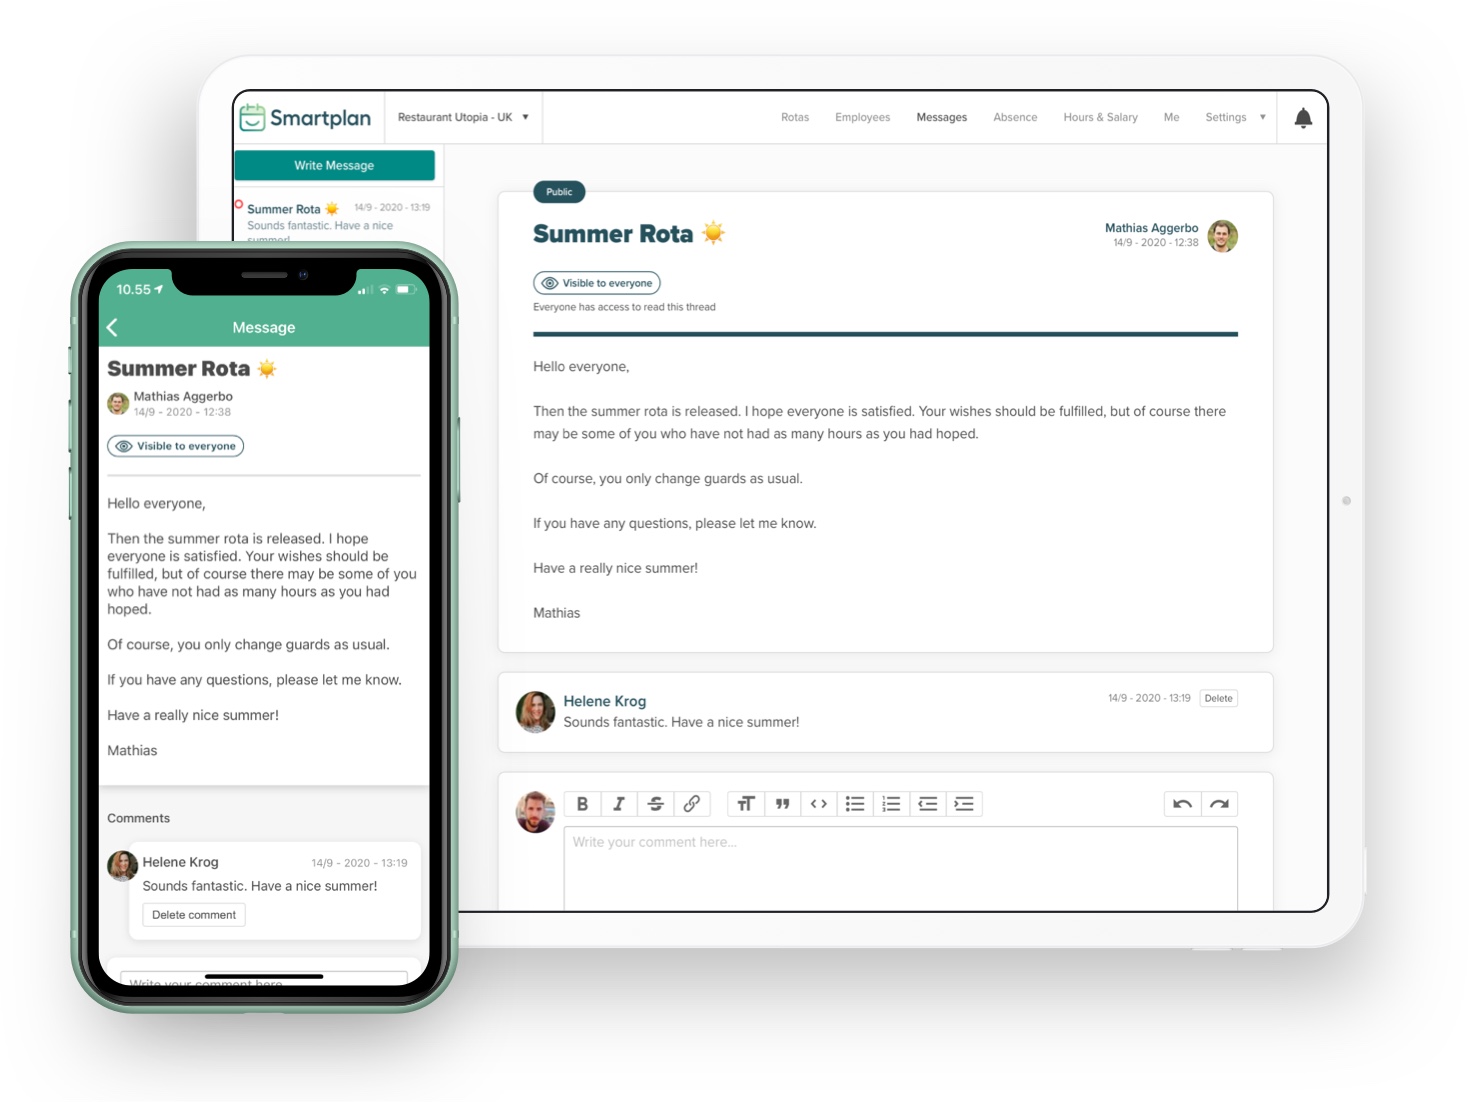 Keep your staff informed! In our message centre you will be able to write private, group and public messages to your employees. You can add daily messages directly in your rotas, too.